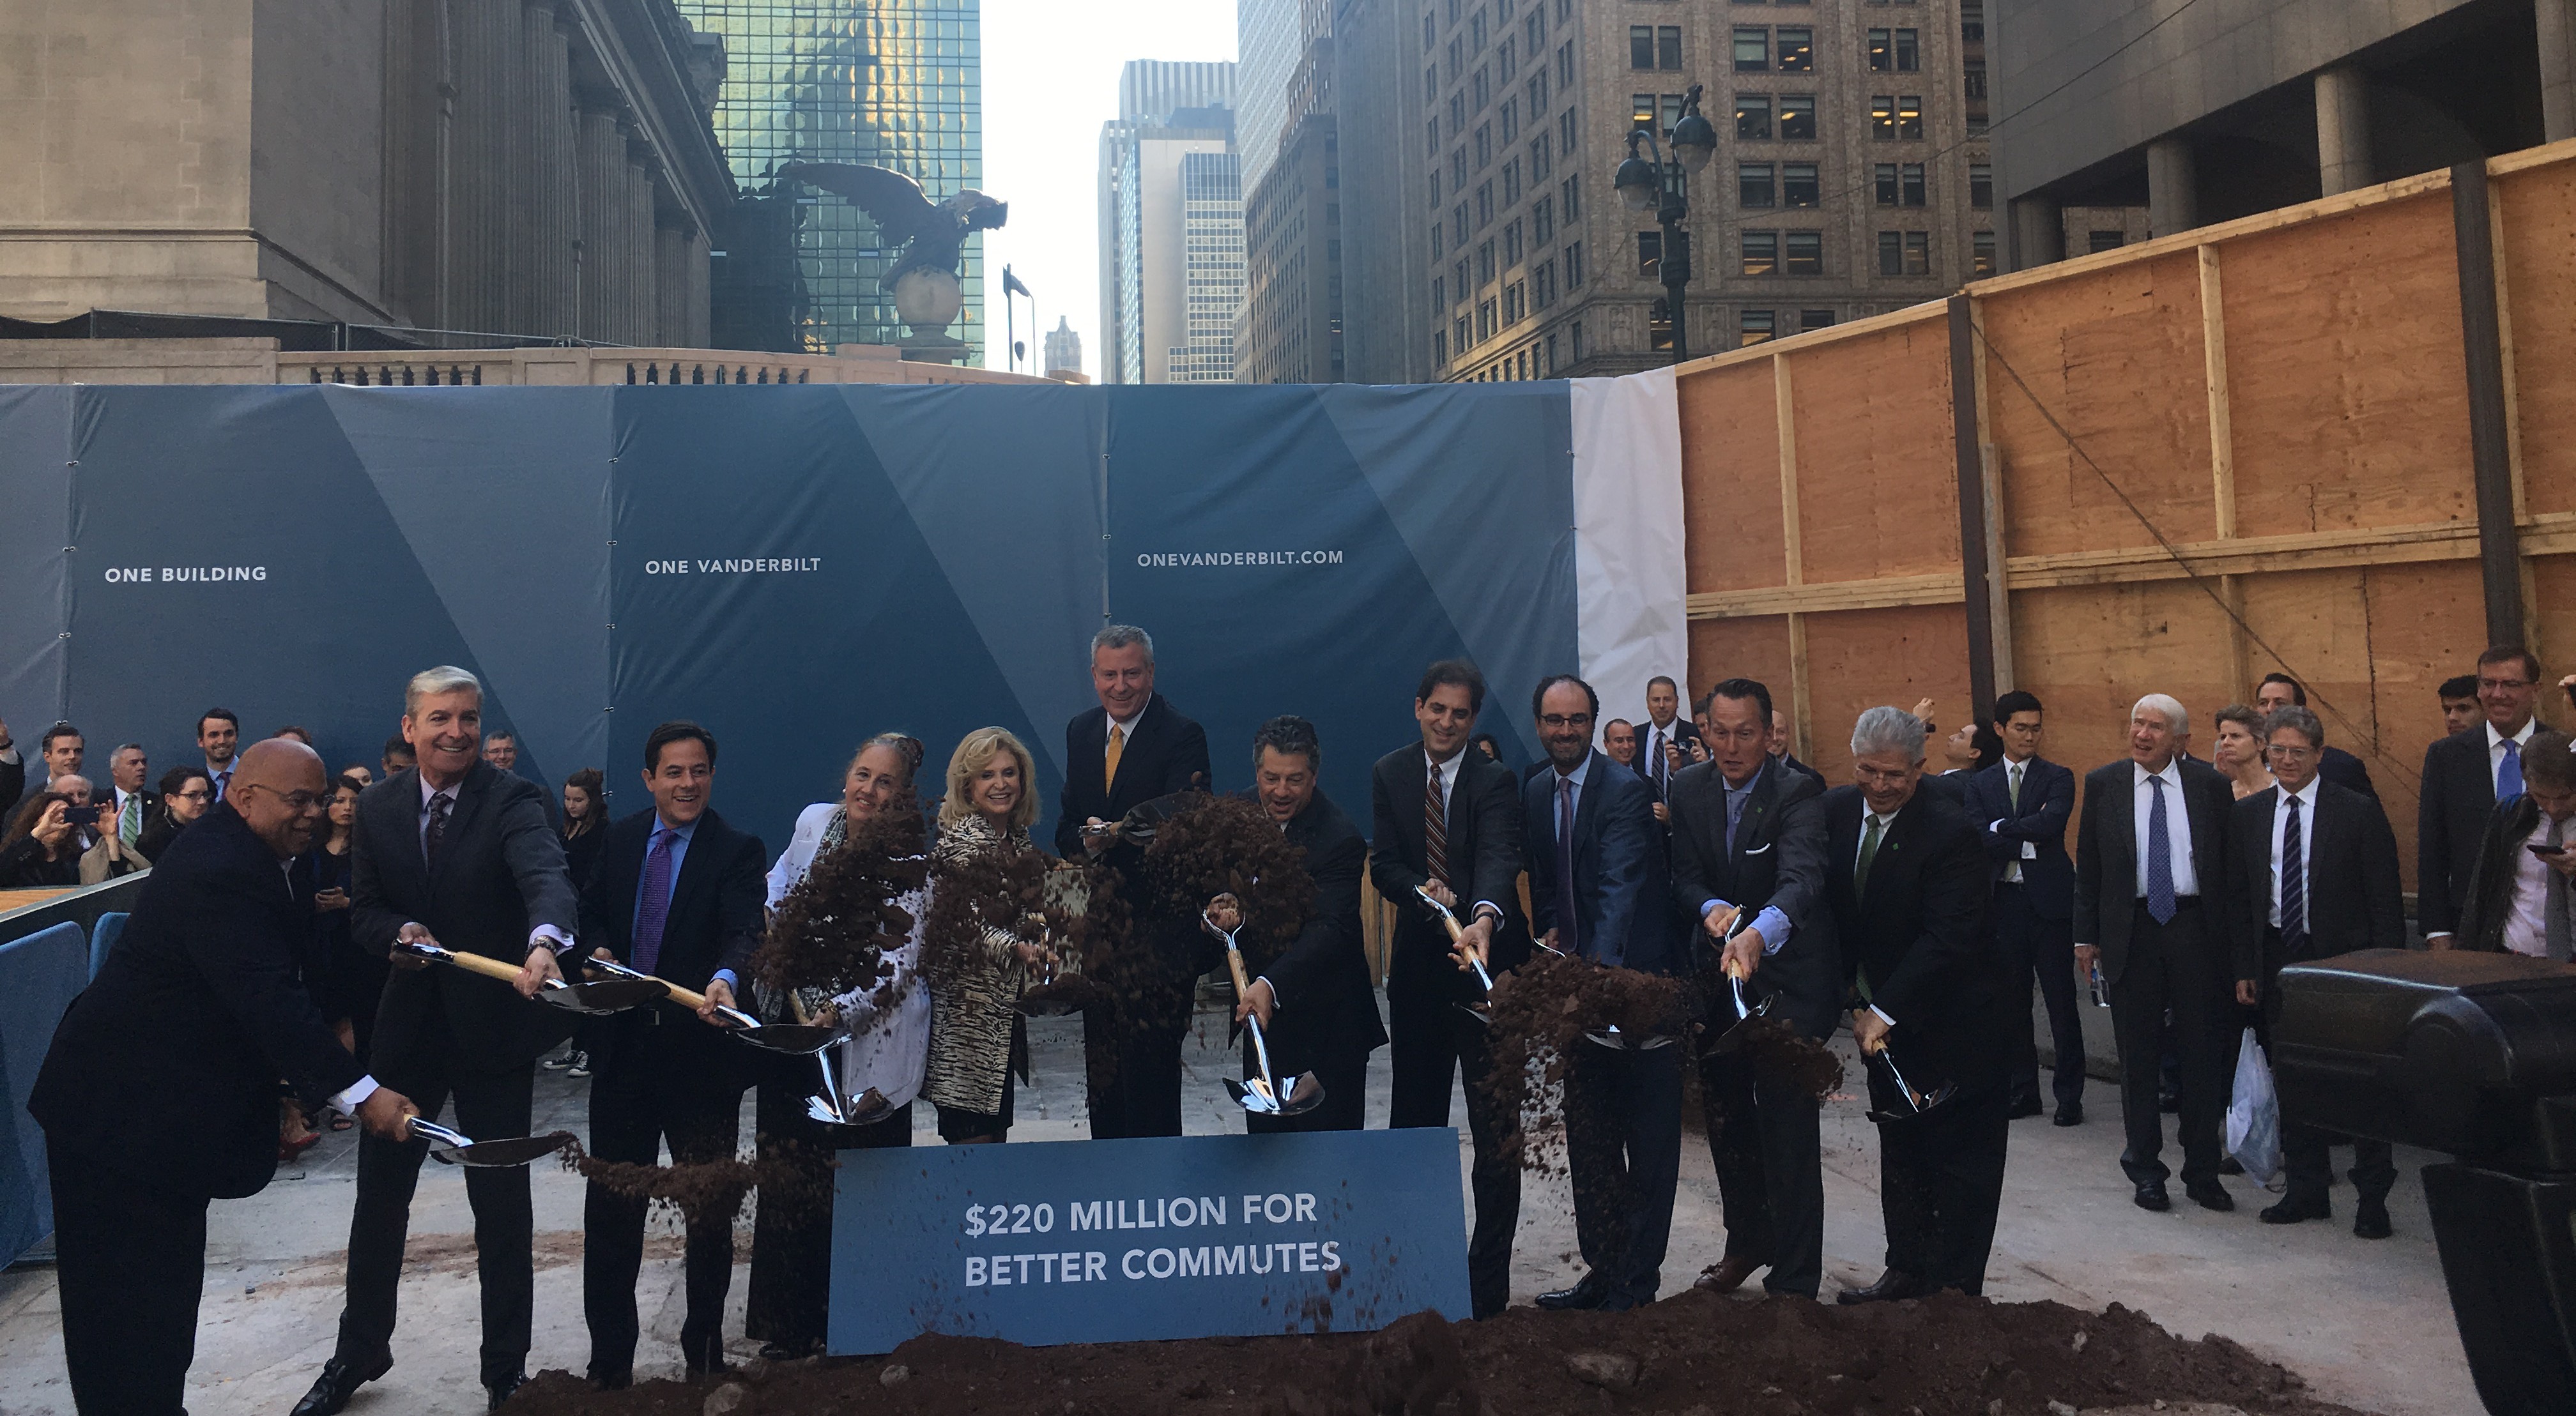 City officials and the One Vanderbilt project team at the groundbreaking ceremony.